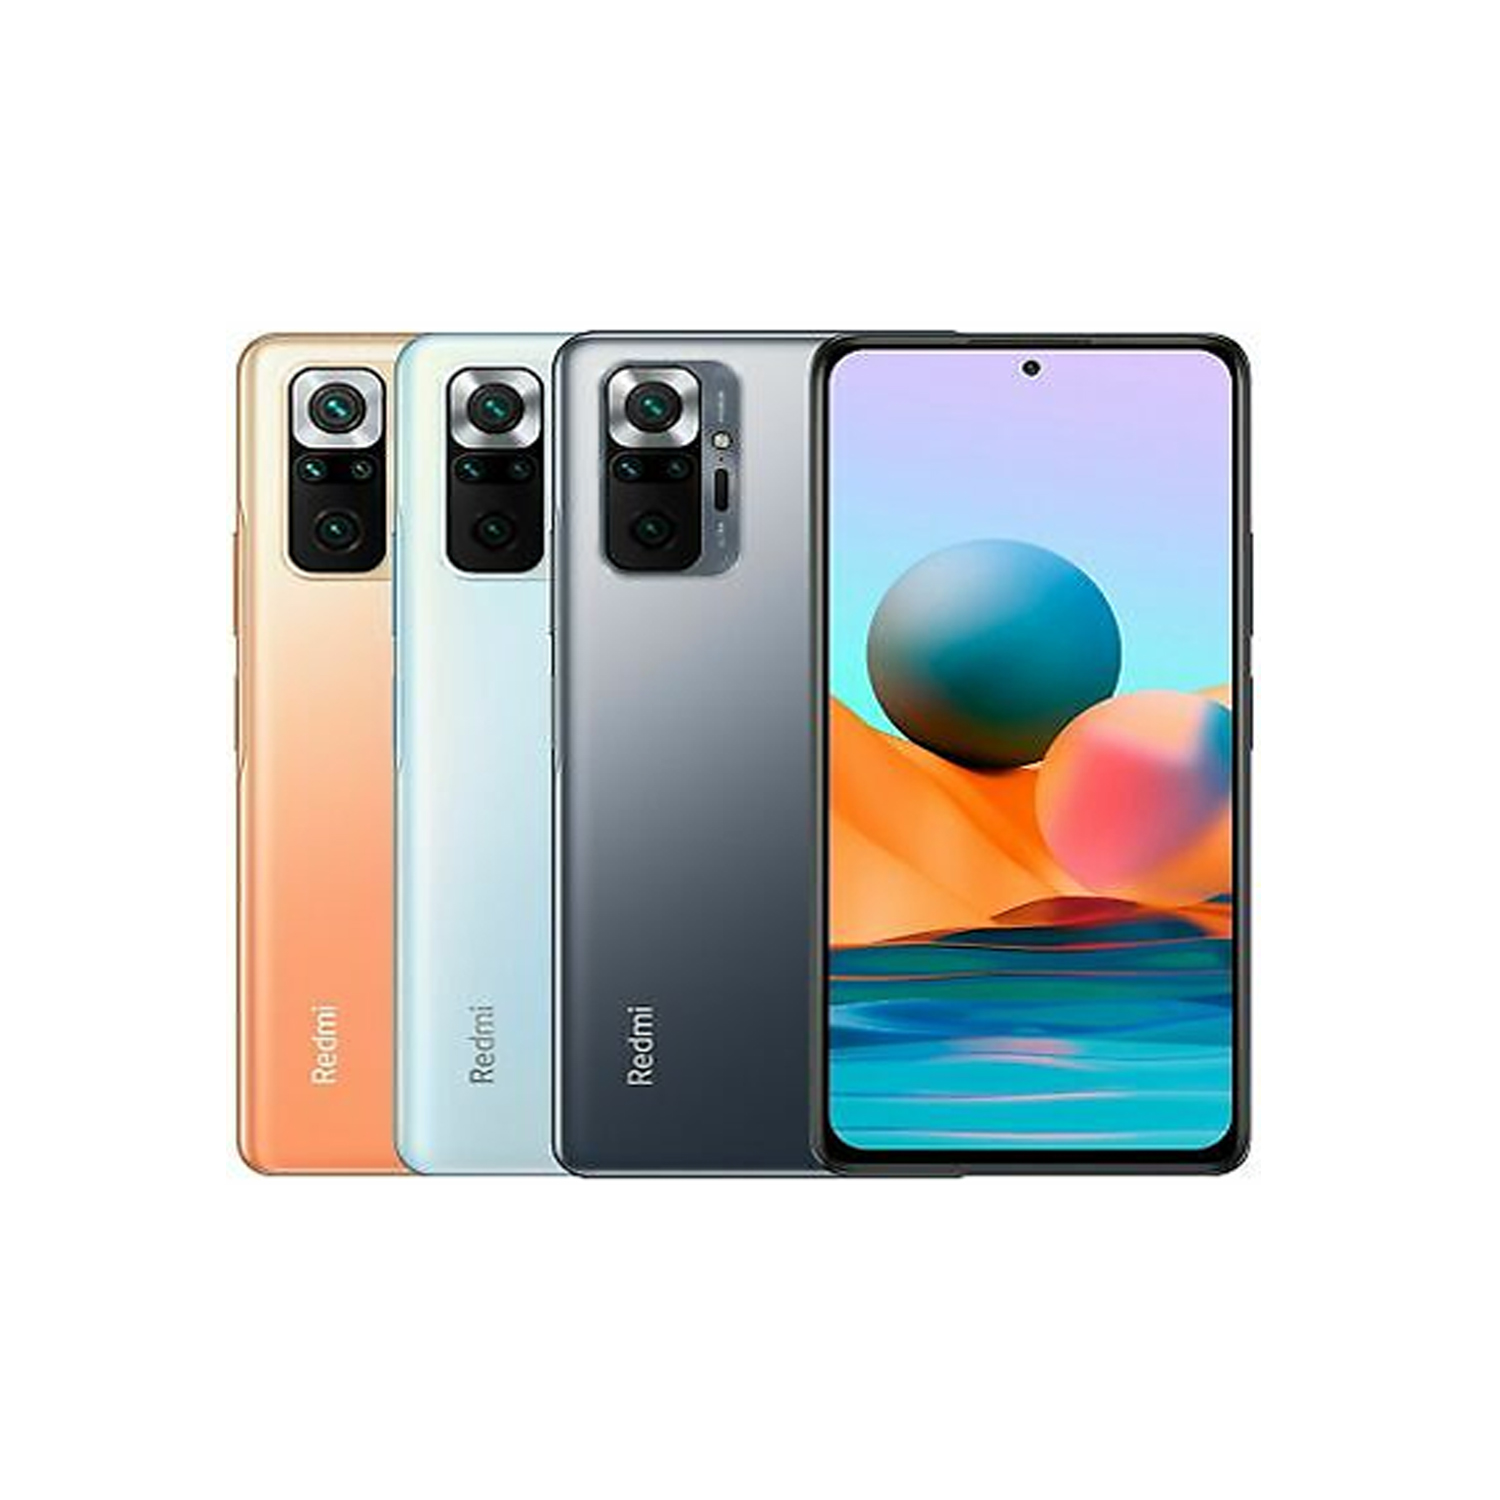 Xiaomi Redmi Note 10 Pro first take: 108MP camera, 120Hz display, and 5,020  mAh battery